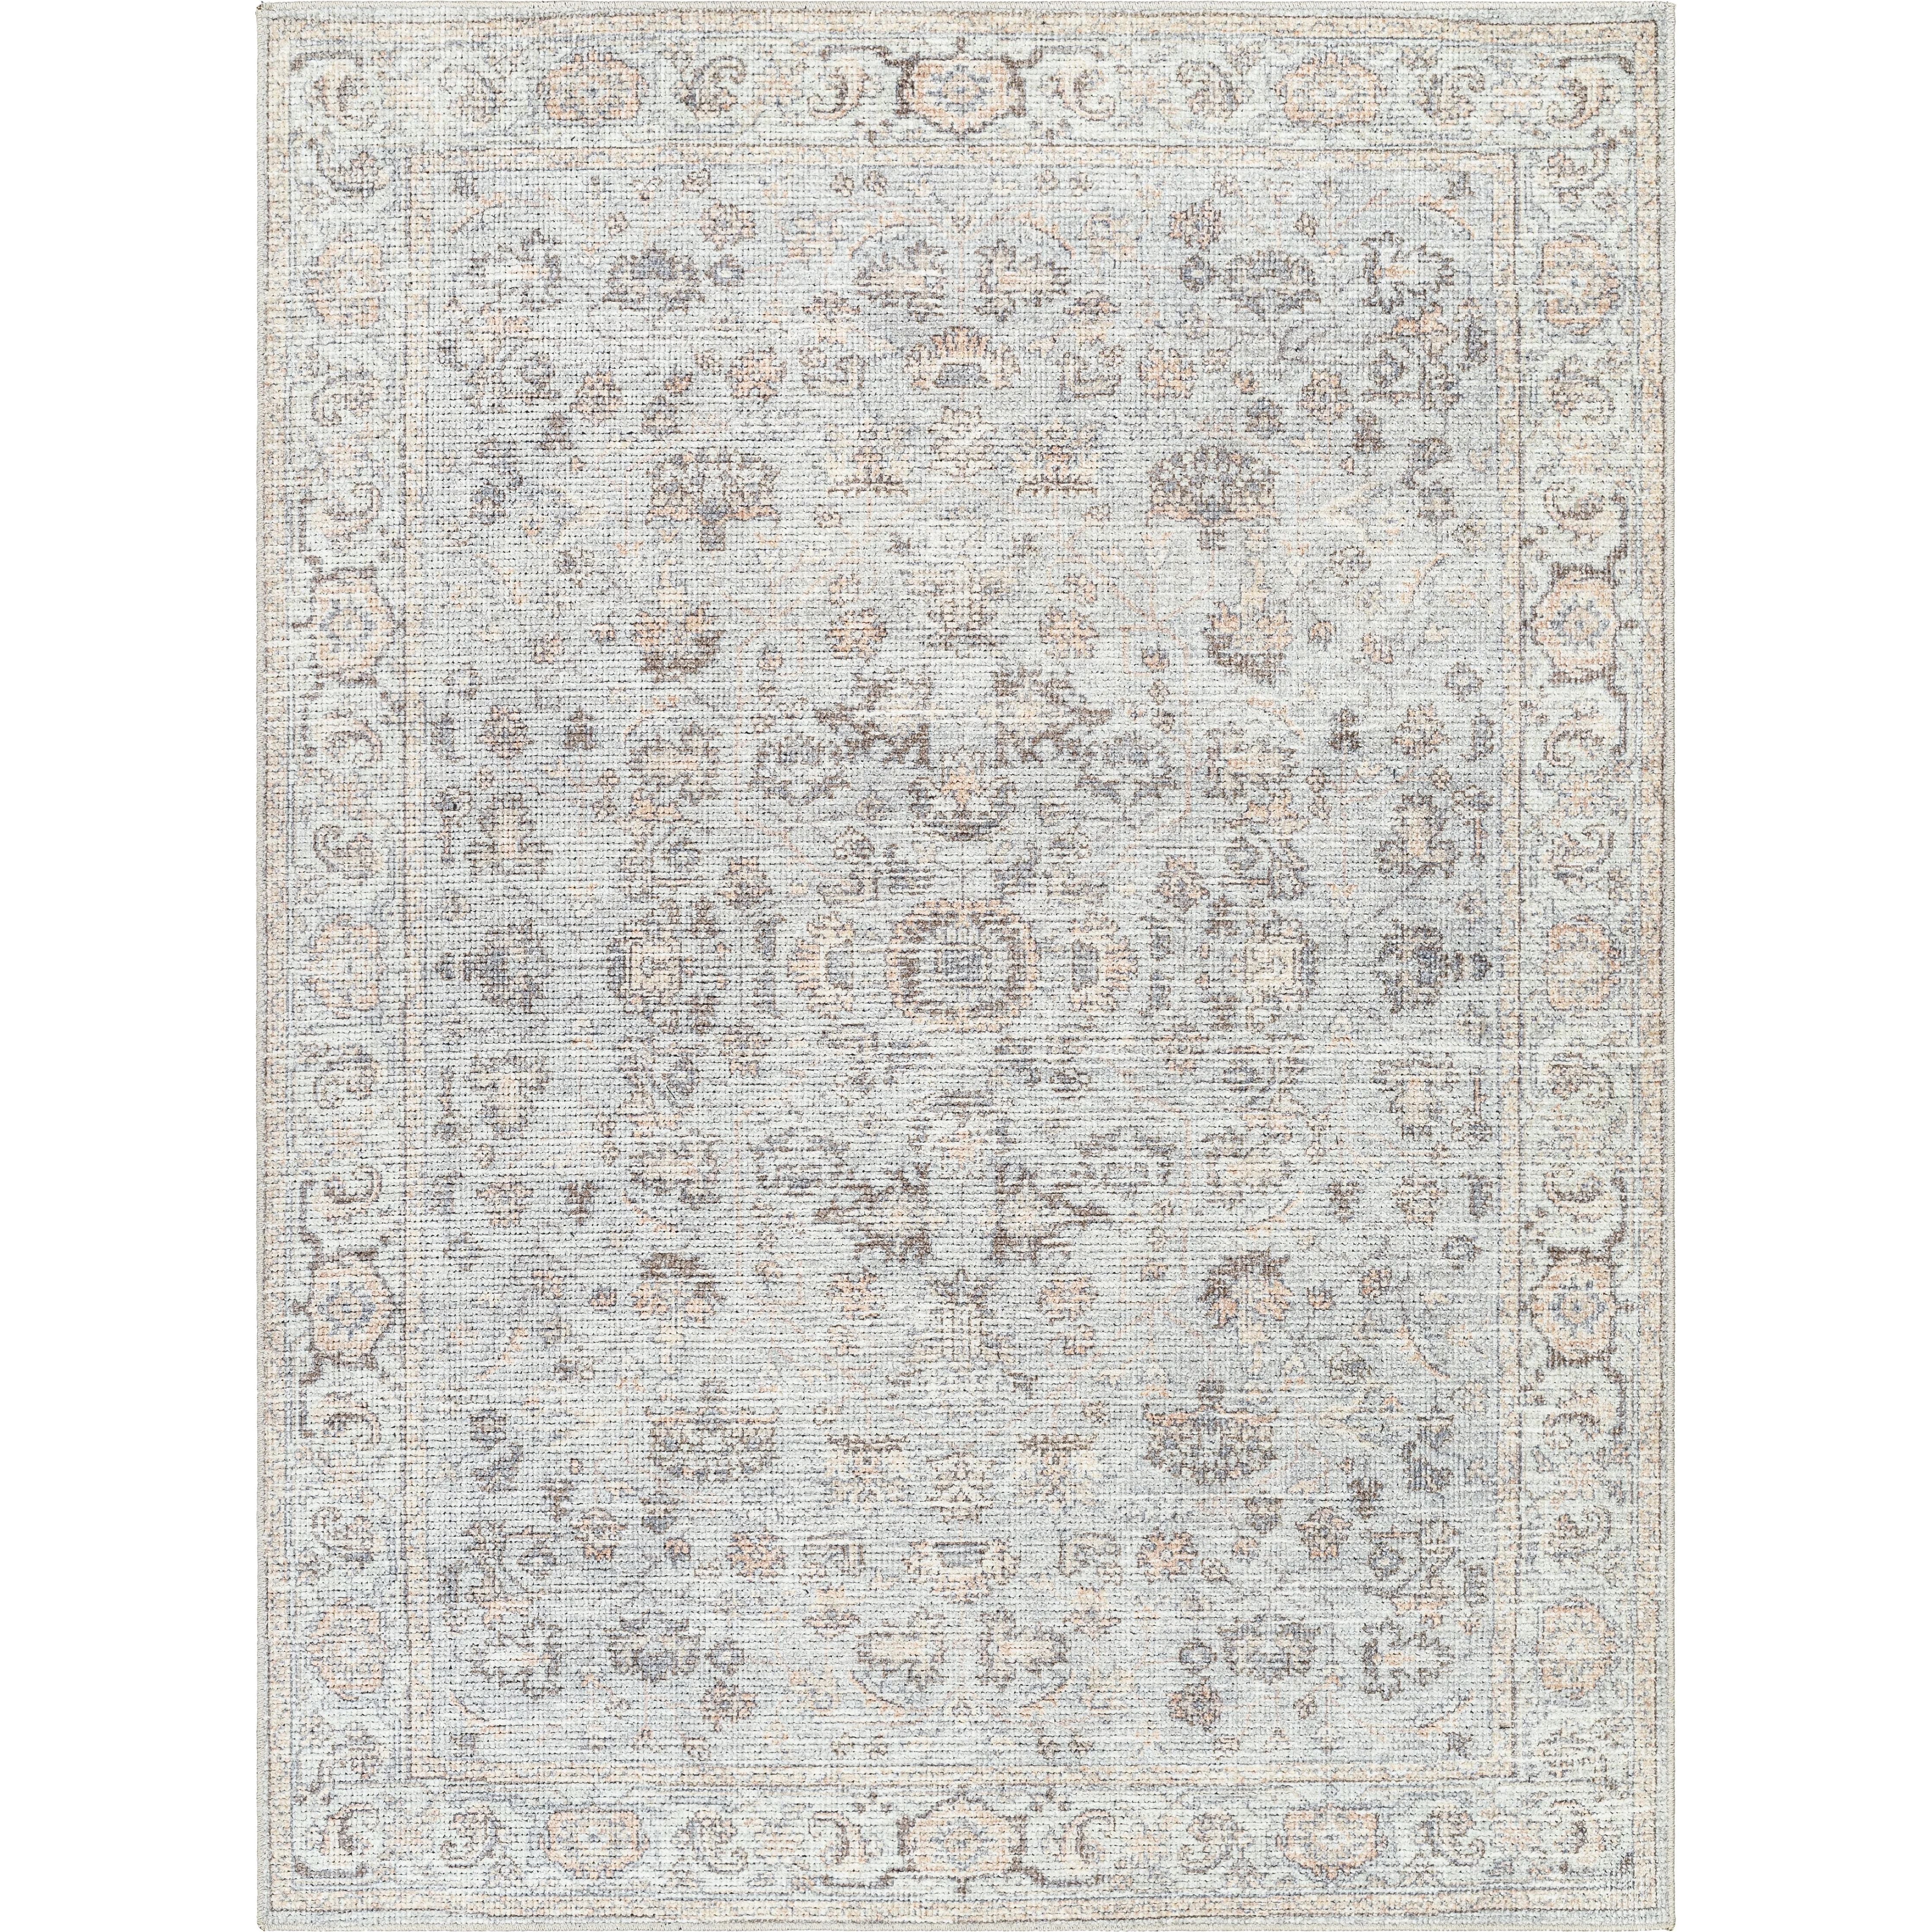 PNW Home x Surya available at Amethyst Home shipping to Australia, UK, and Canada. Organic modern design with easy to clean rugs for a family home in  the Calabasas metro area.